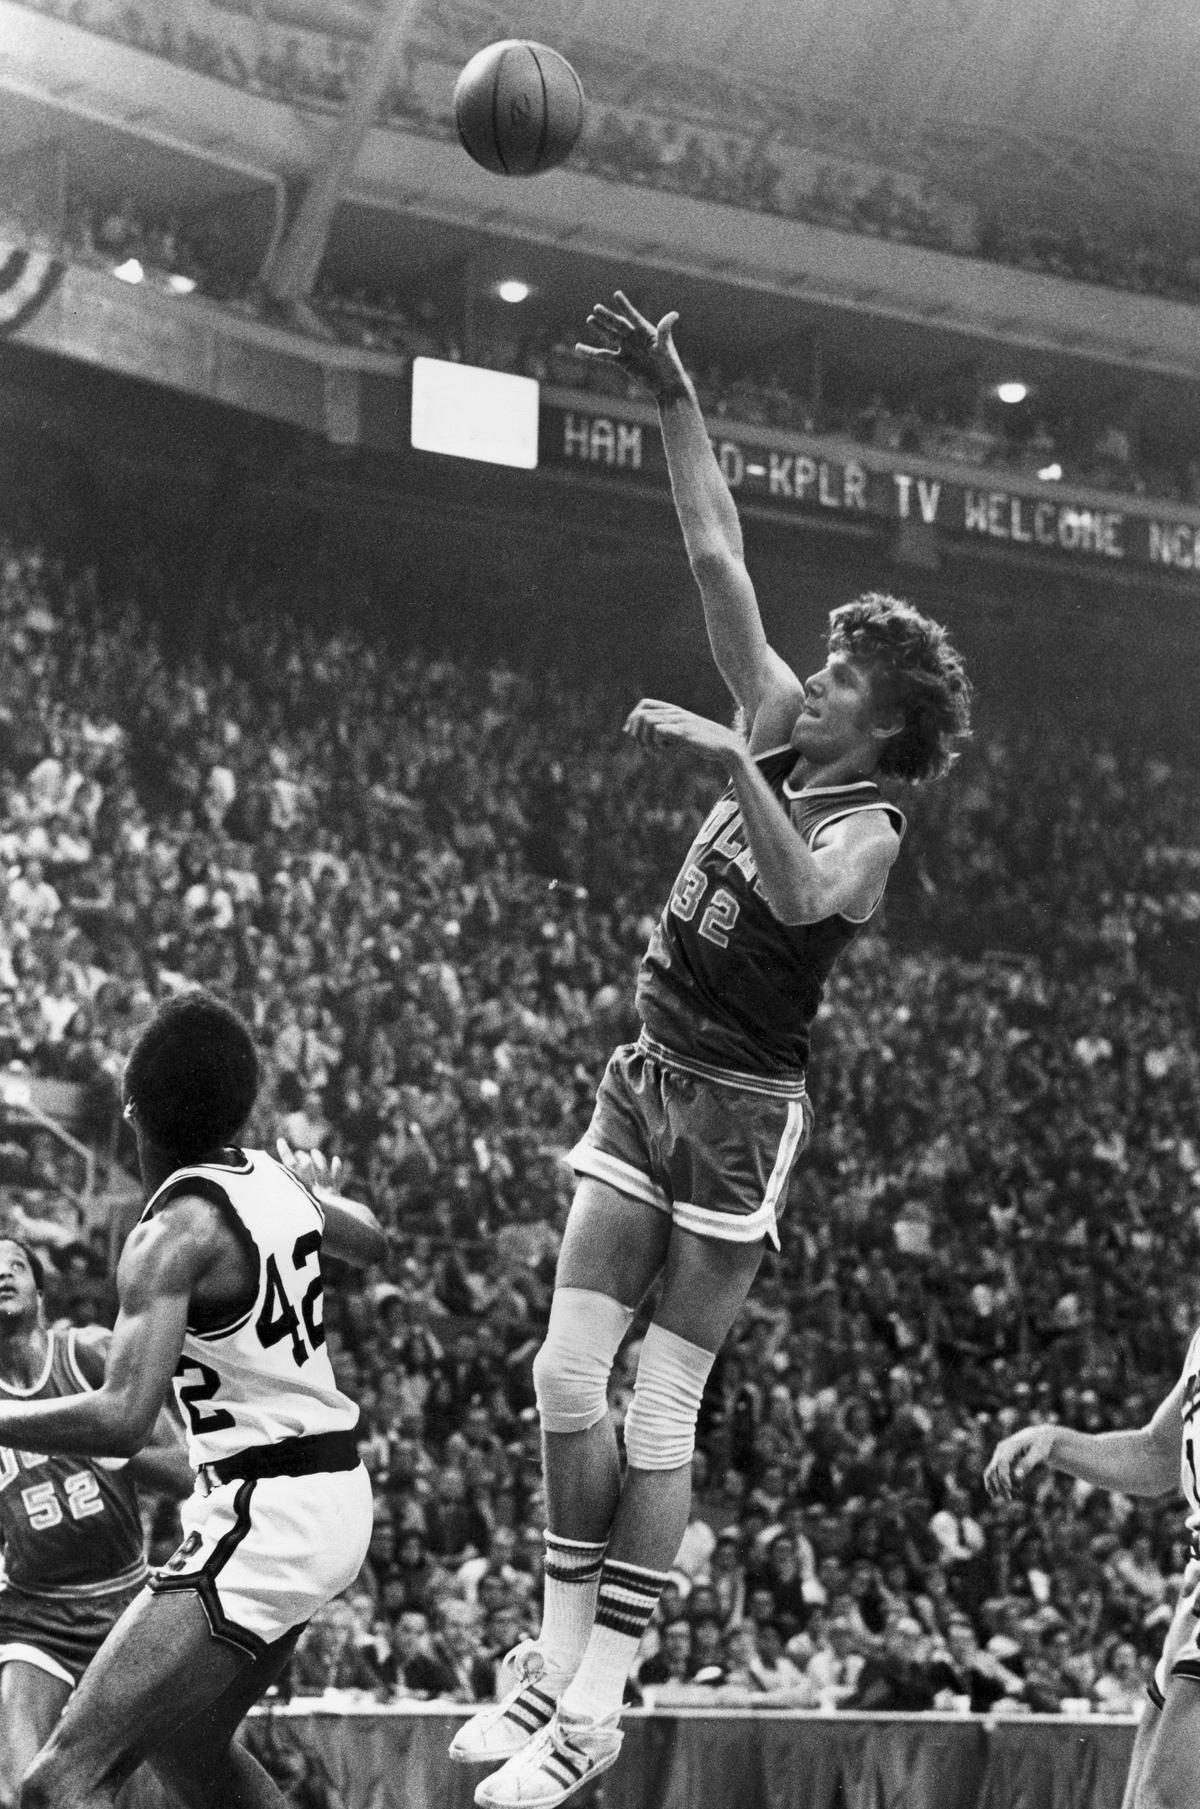 UCLA centre Bill Walton (32) shoots for two of his record 44 points against Memphis State in the final game of the NCAA college basketball tournament in St. Louis, March 26, 1973. Walton’s performance against Memphis State is still one of the greatest individual games in history.